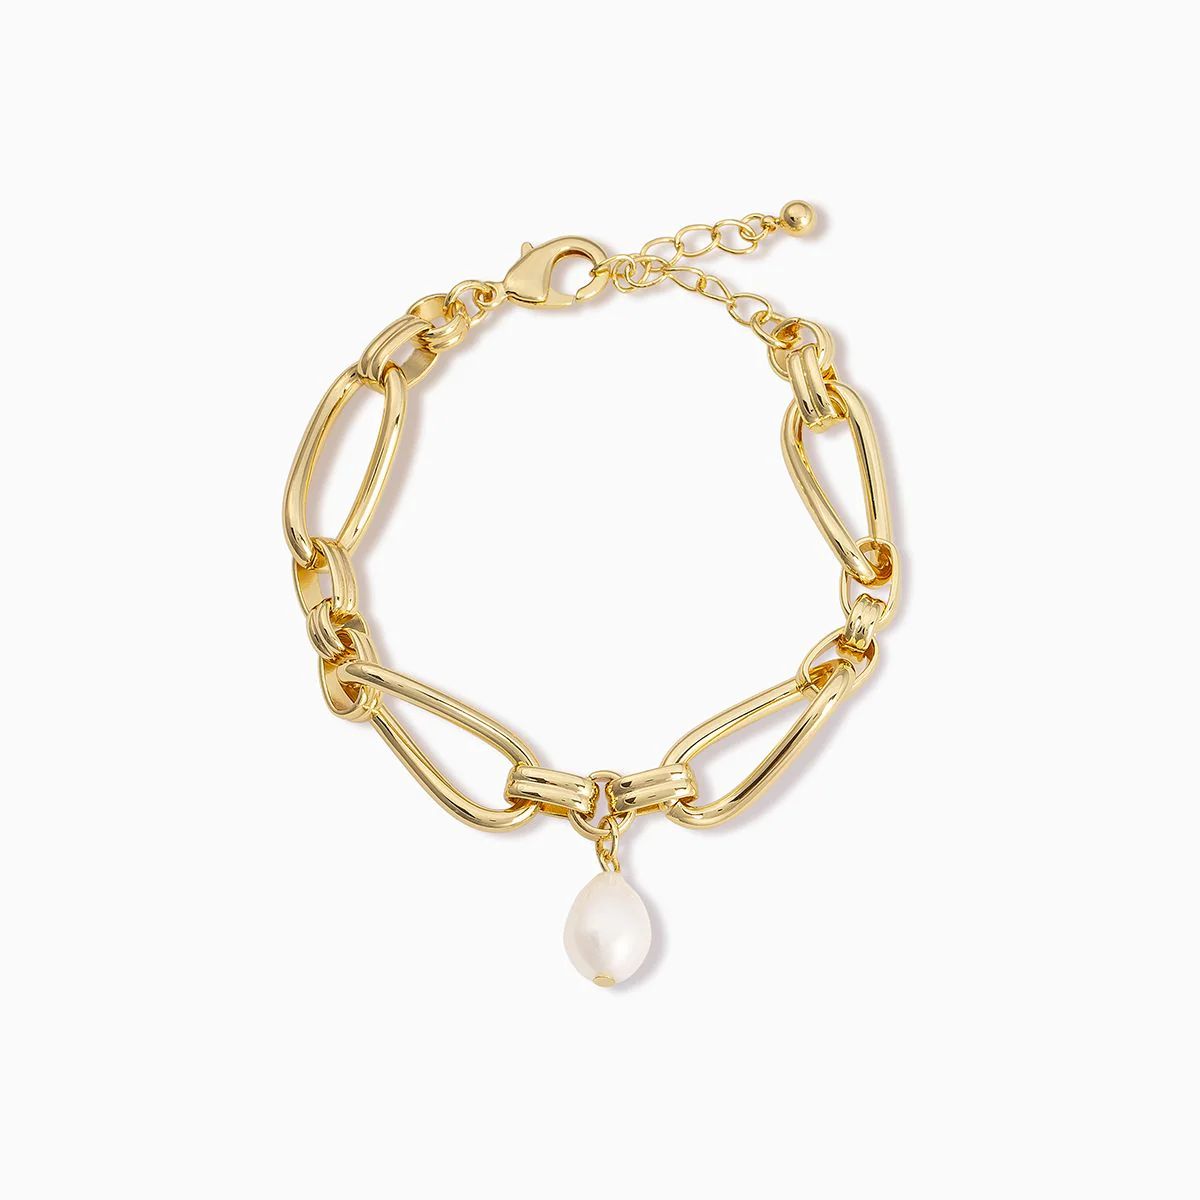 Chain Bracelet with Pearl | Uncommon James